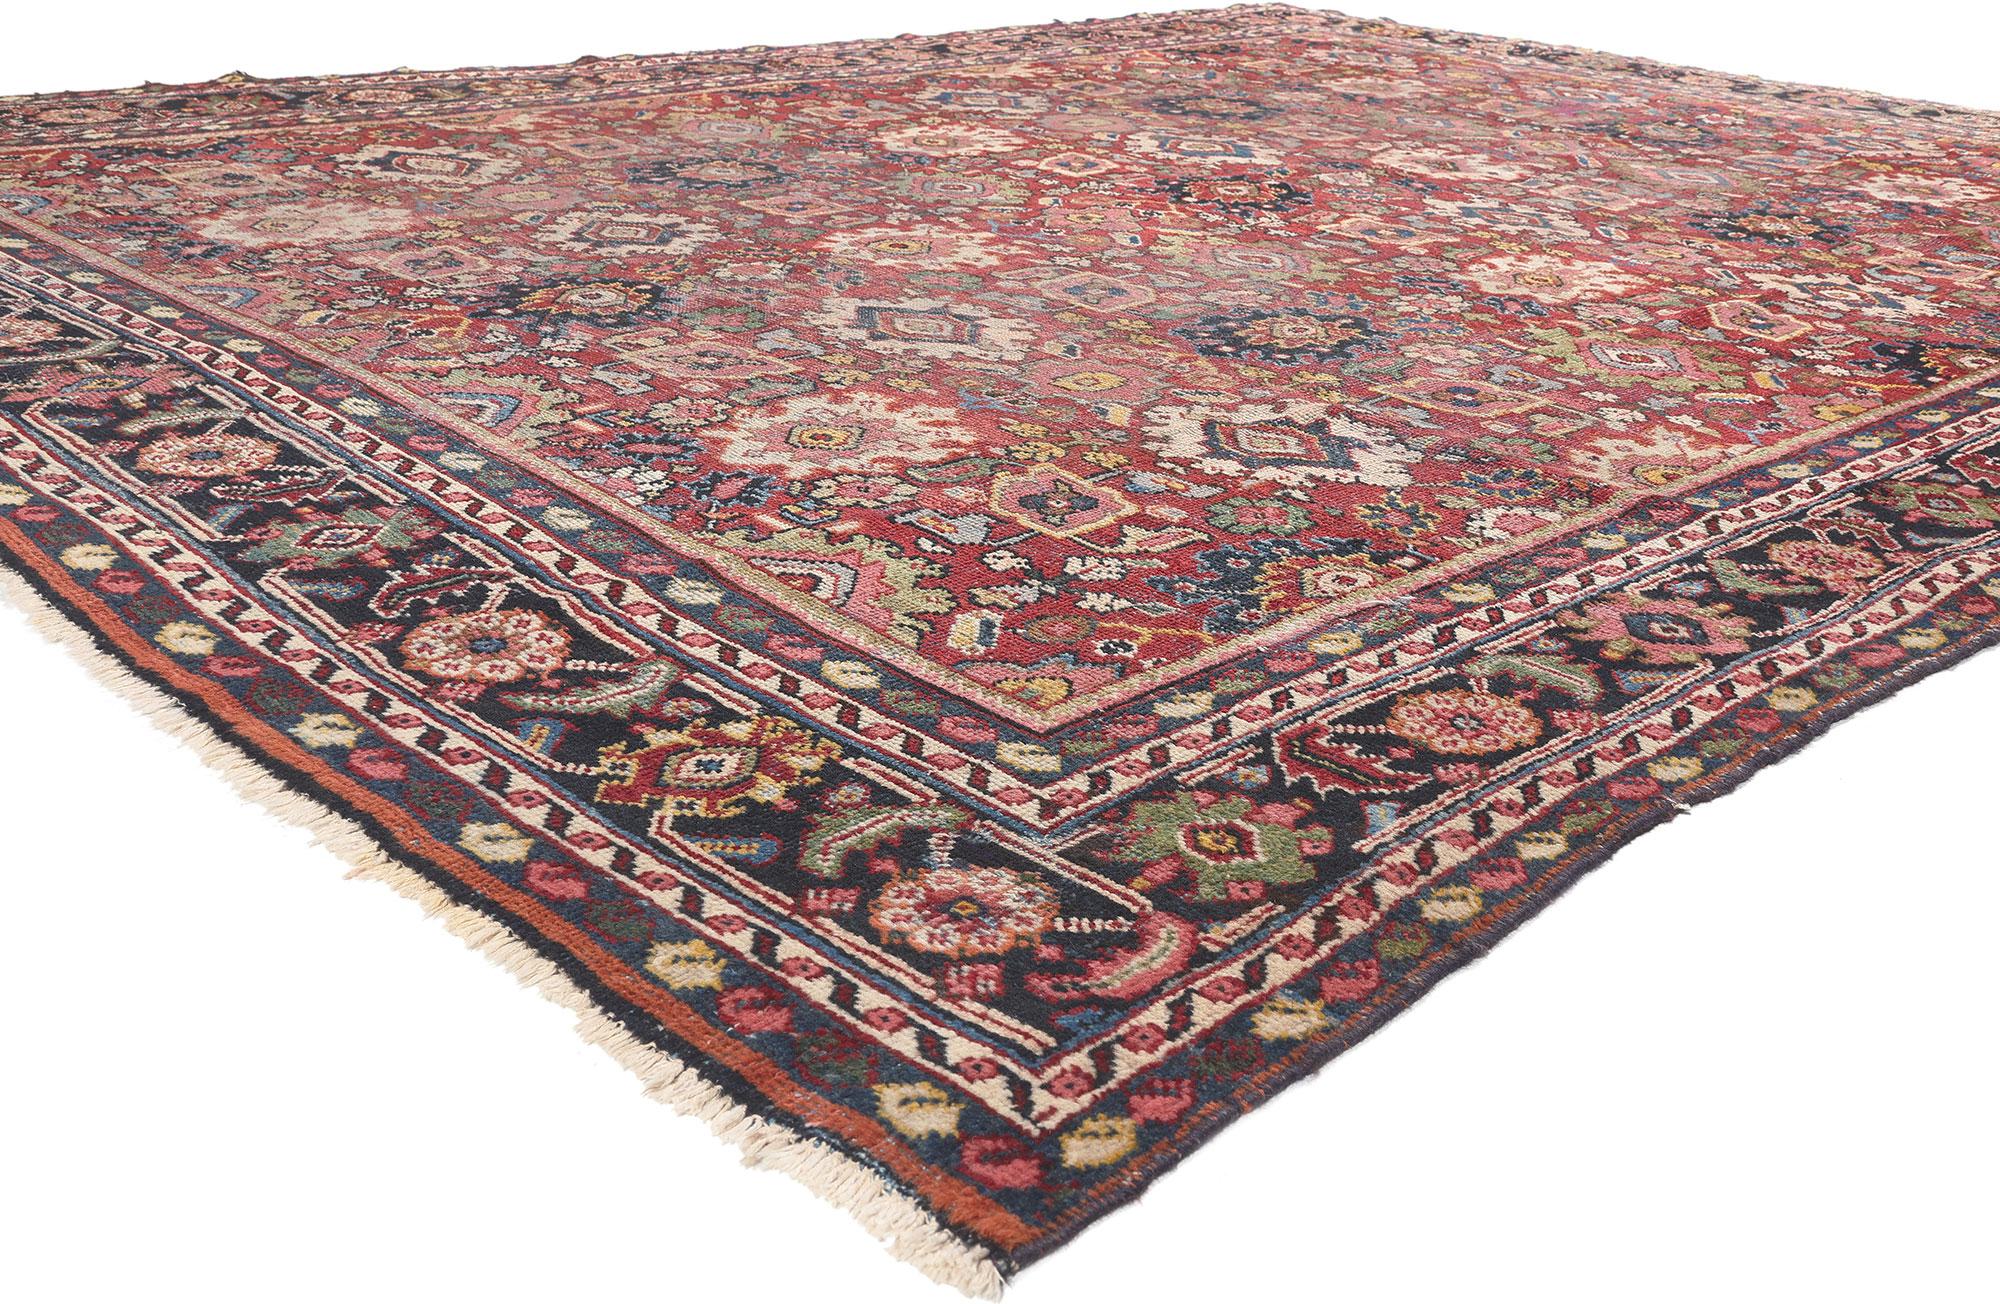 78660 Antique-Worn Persian Mahal Rug, 09'02 x 12'02.
​Experience the perfect blend of casual elegance and rustic sensibility in this hand knotted wool antique-worn Persian Mahal rug. Indulge in the intricate botanical design and traditional color